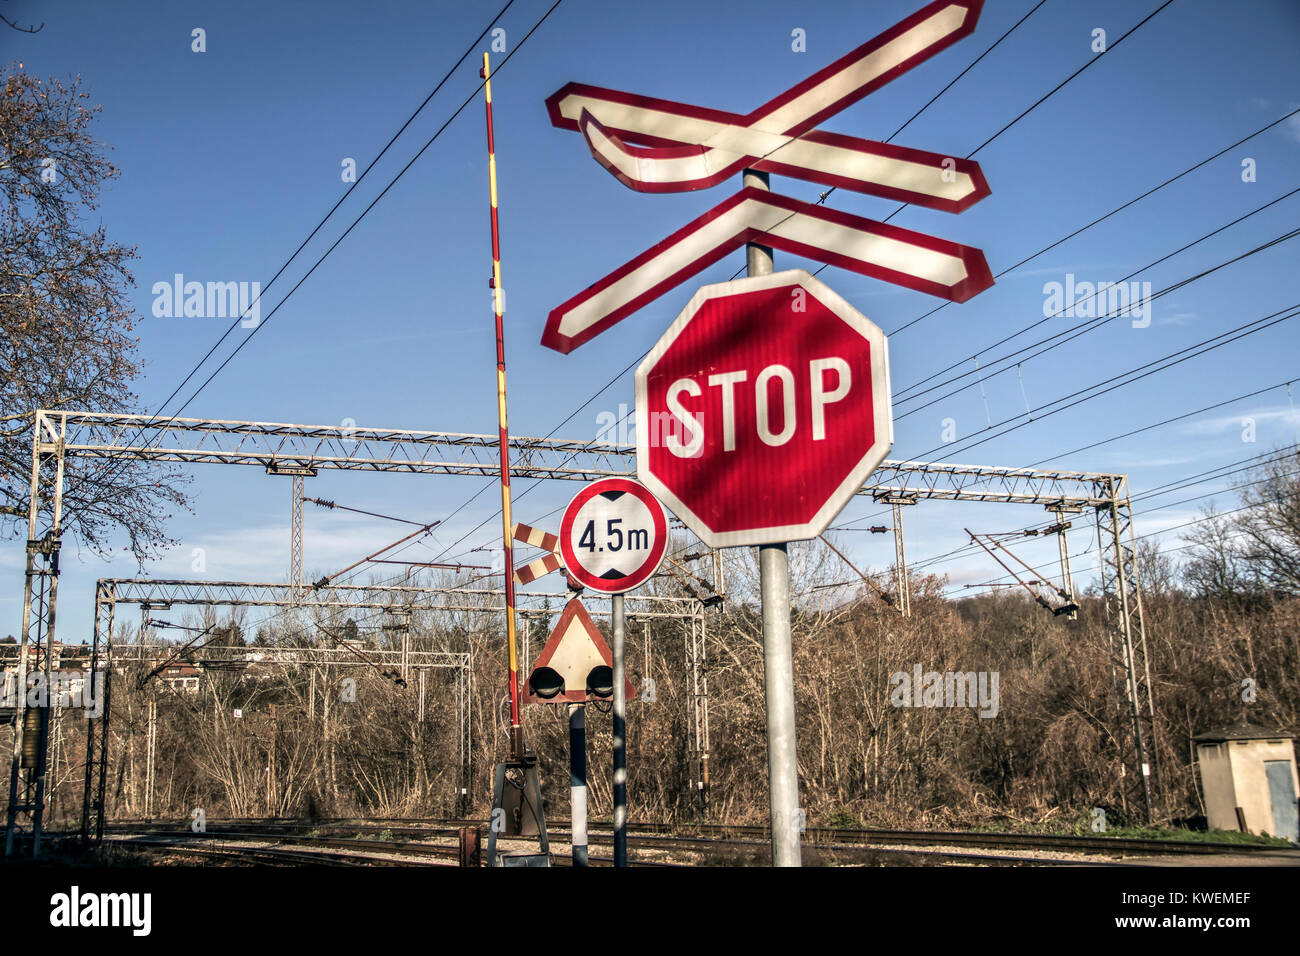 Serbia - Traffic signs on the road in front of a railroad crossing intersection Stock Photo